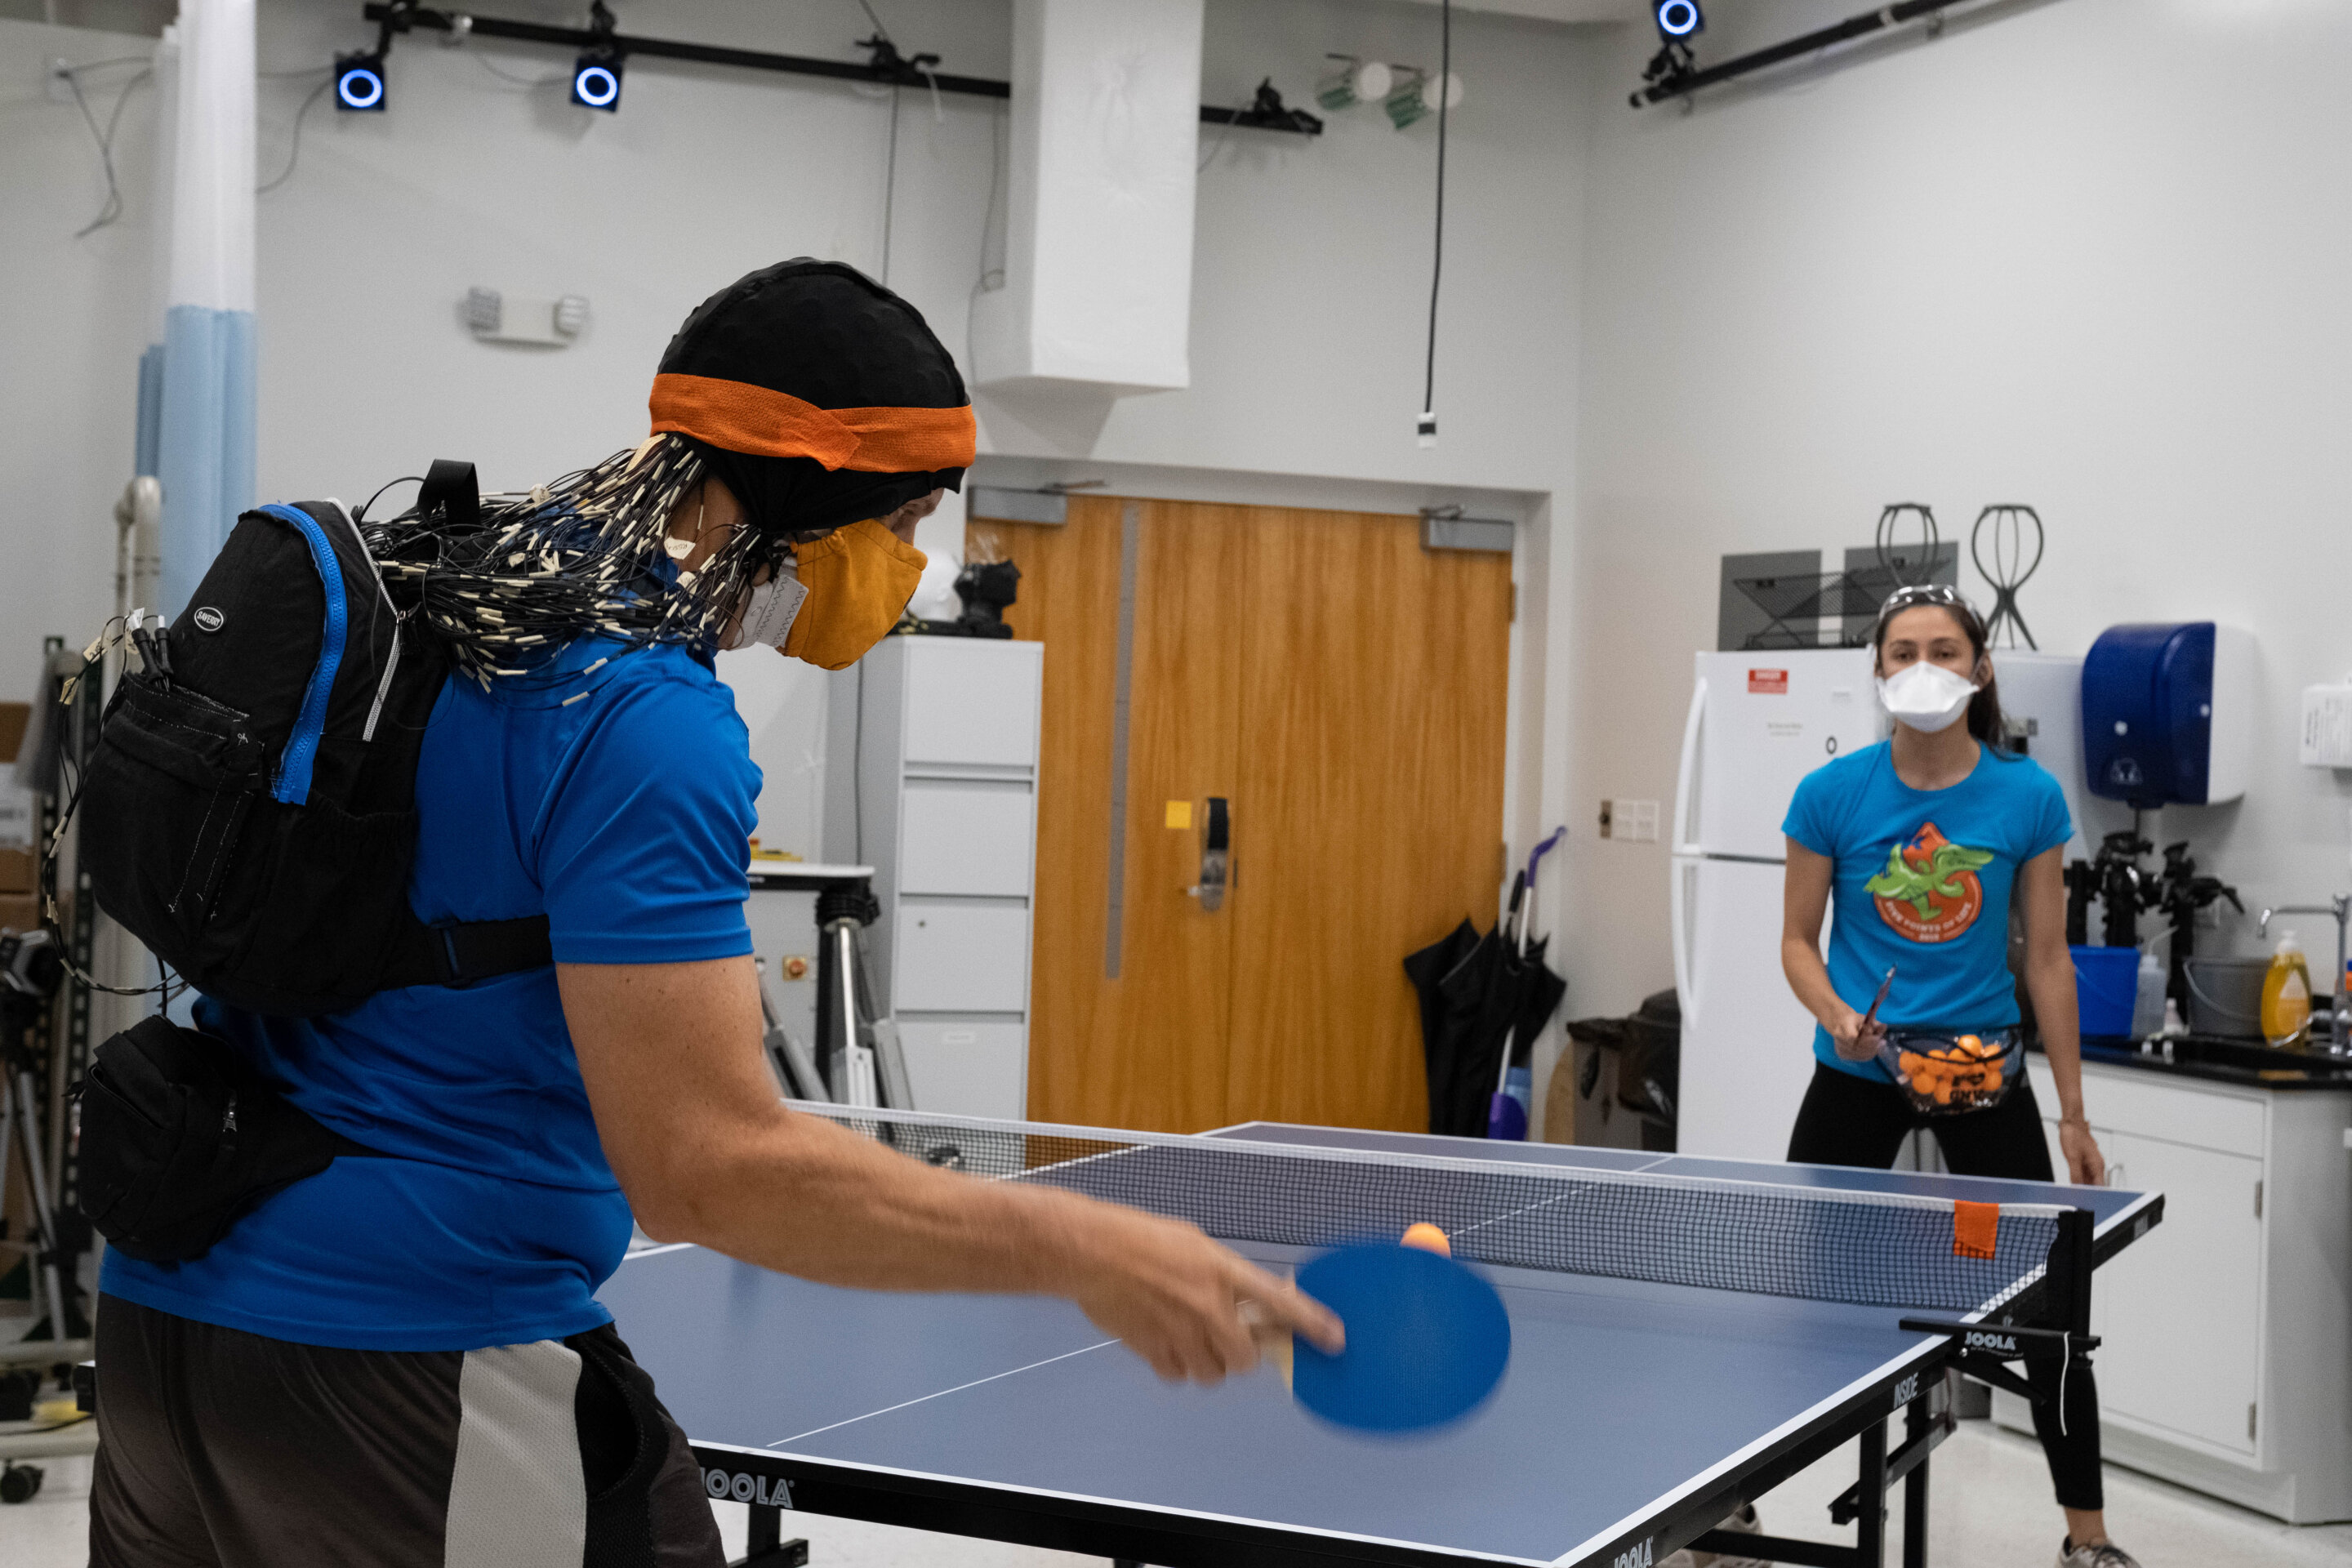 Table tennis brain teaser Playing against robots makes our brains work harder